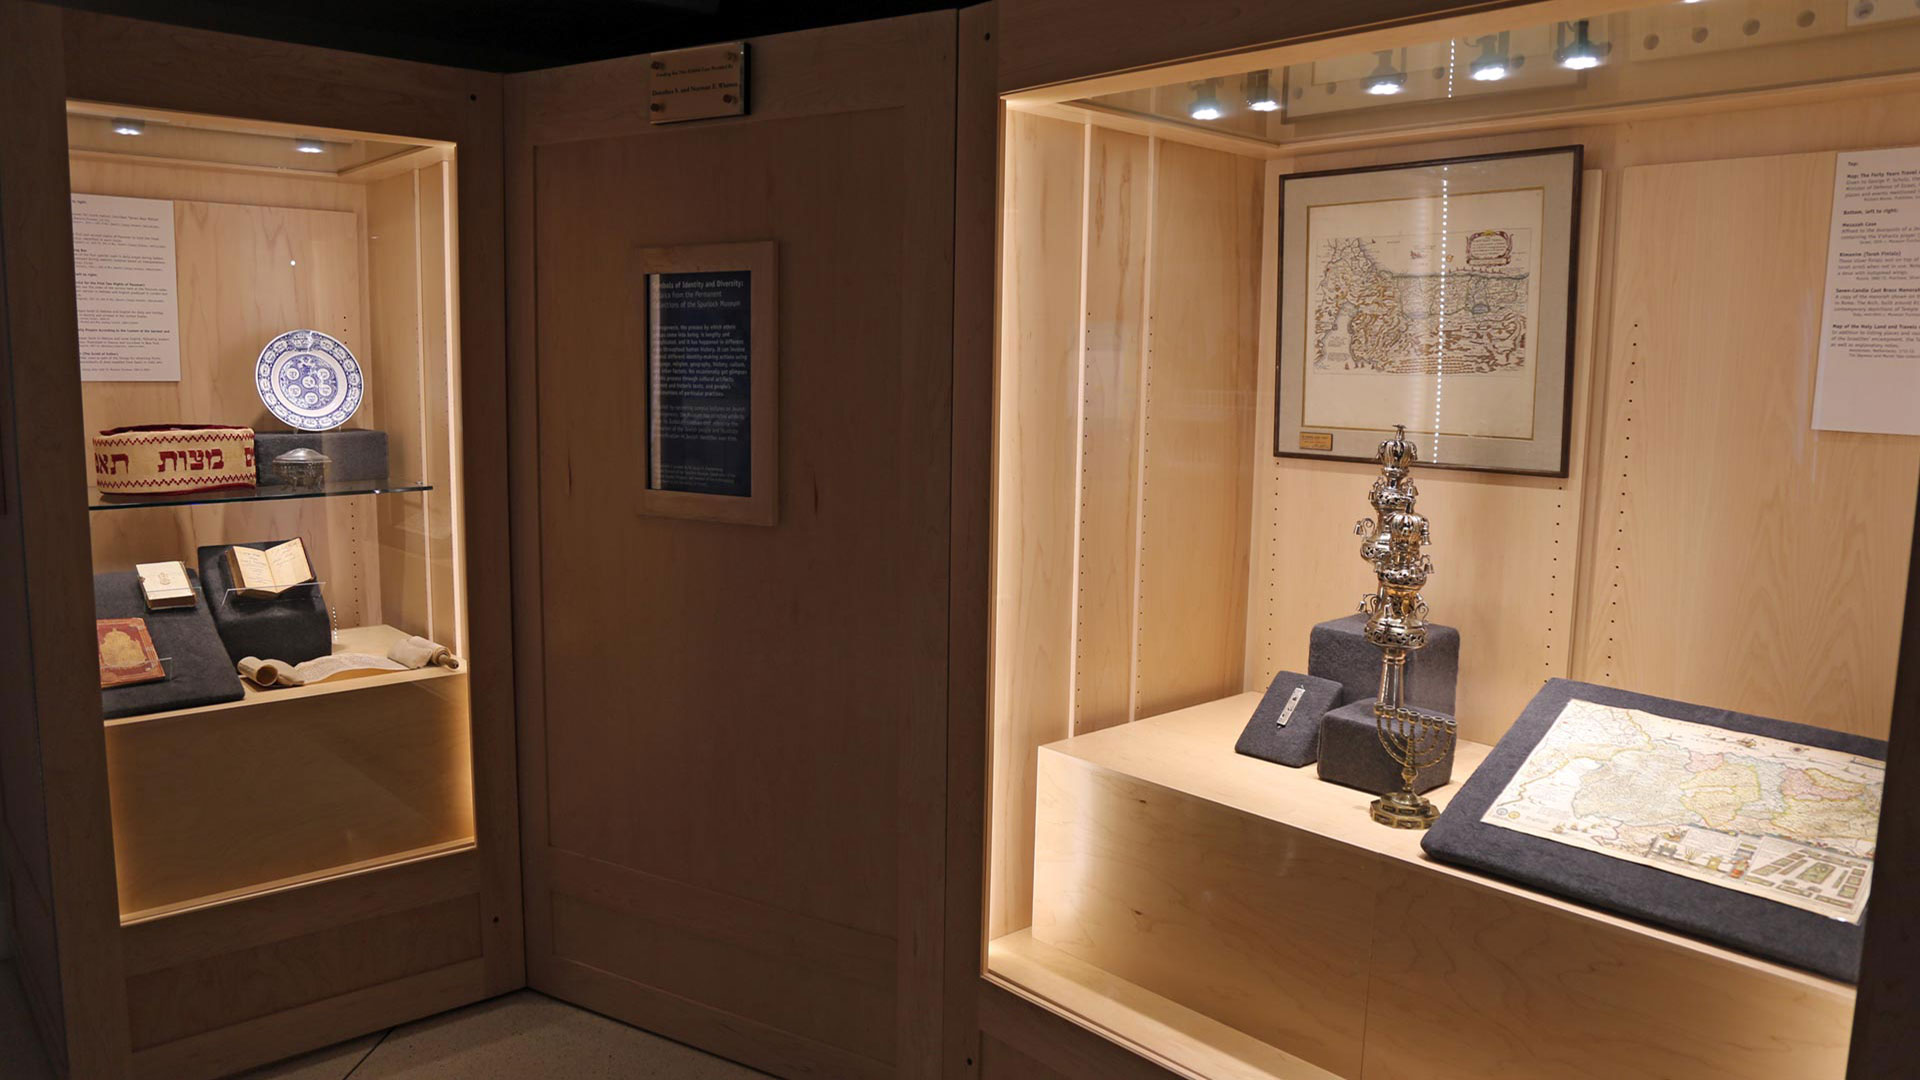 cases showing objects from the Symbols of Identity and Diversity: Judaica from the Permanent Collection of the Spurlock Museum exhibit